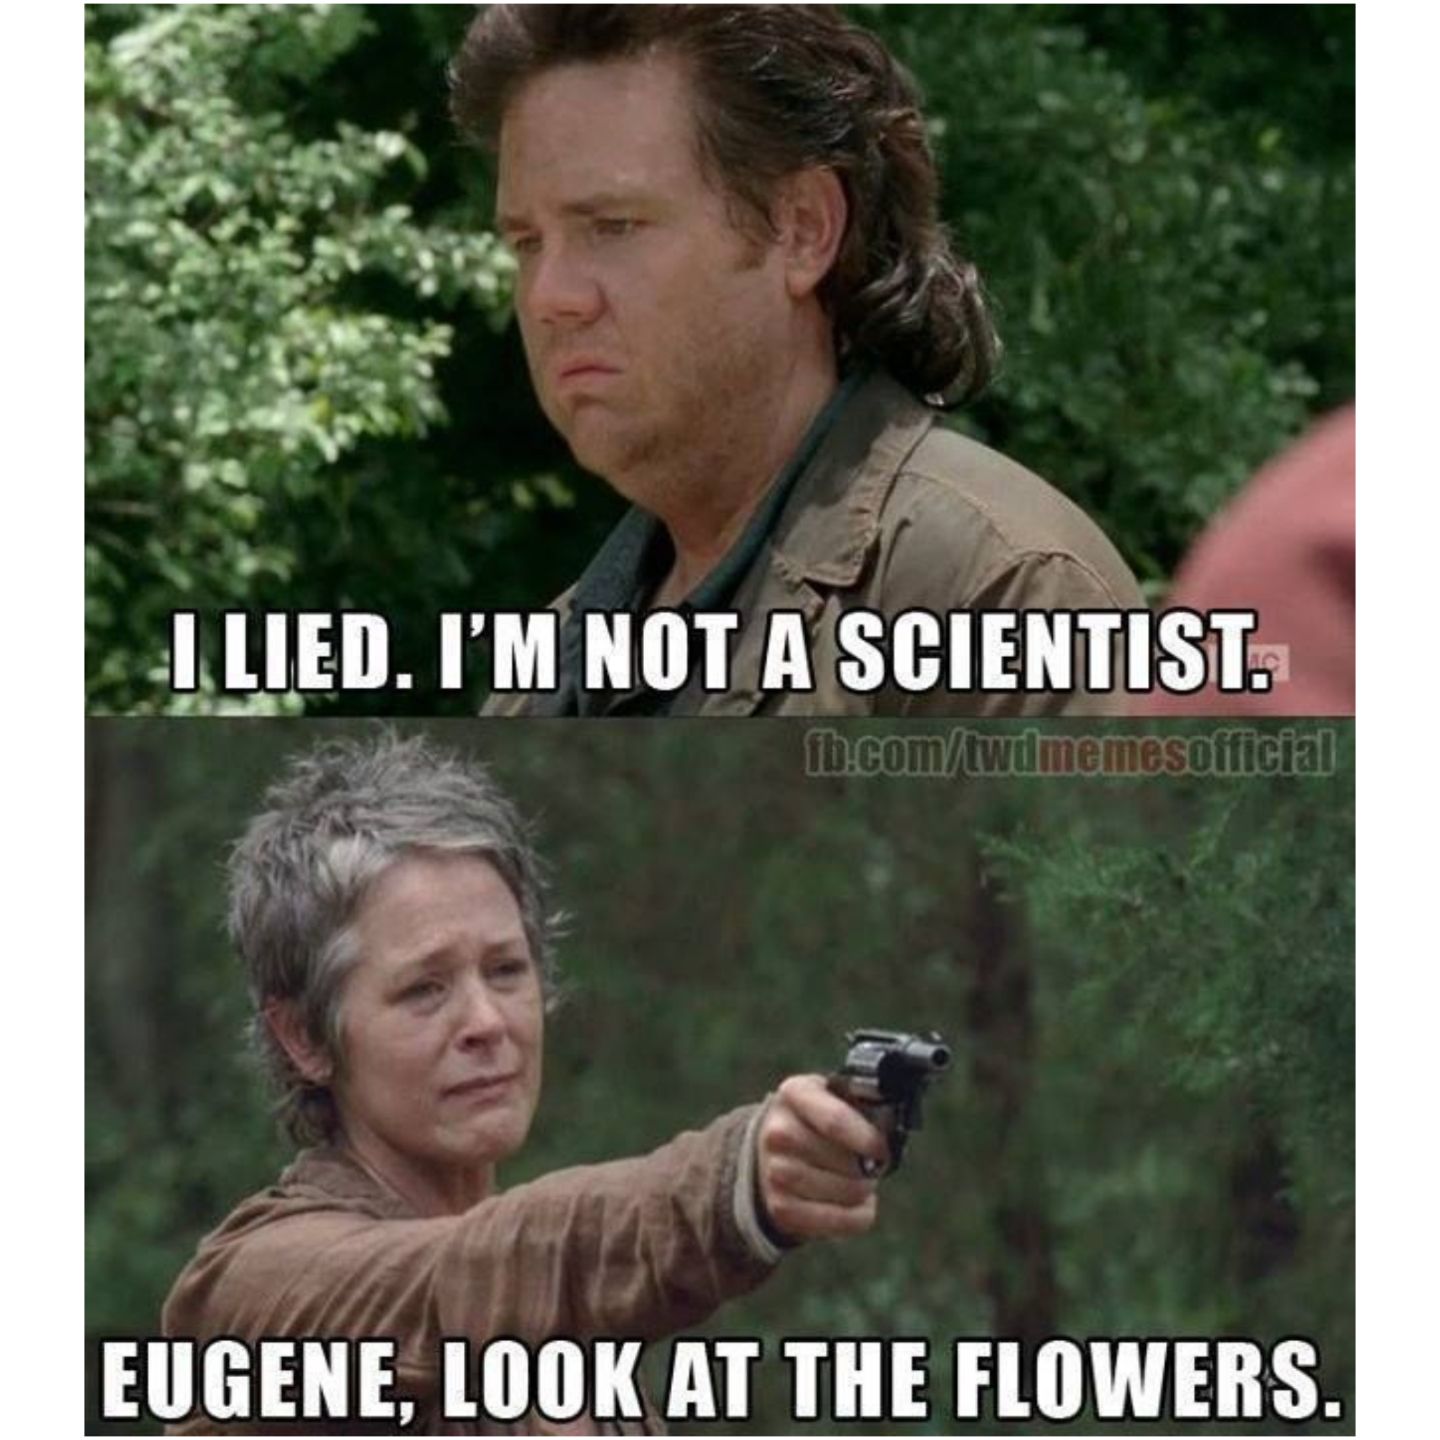 Funny meme about Eugene not being a scientist and Carol telling him to look at the flowers. 